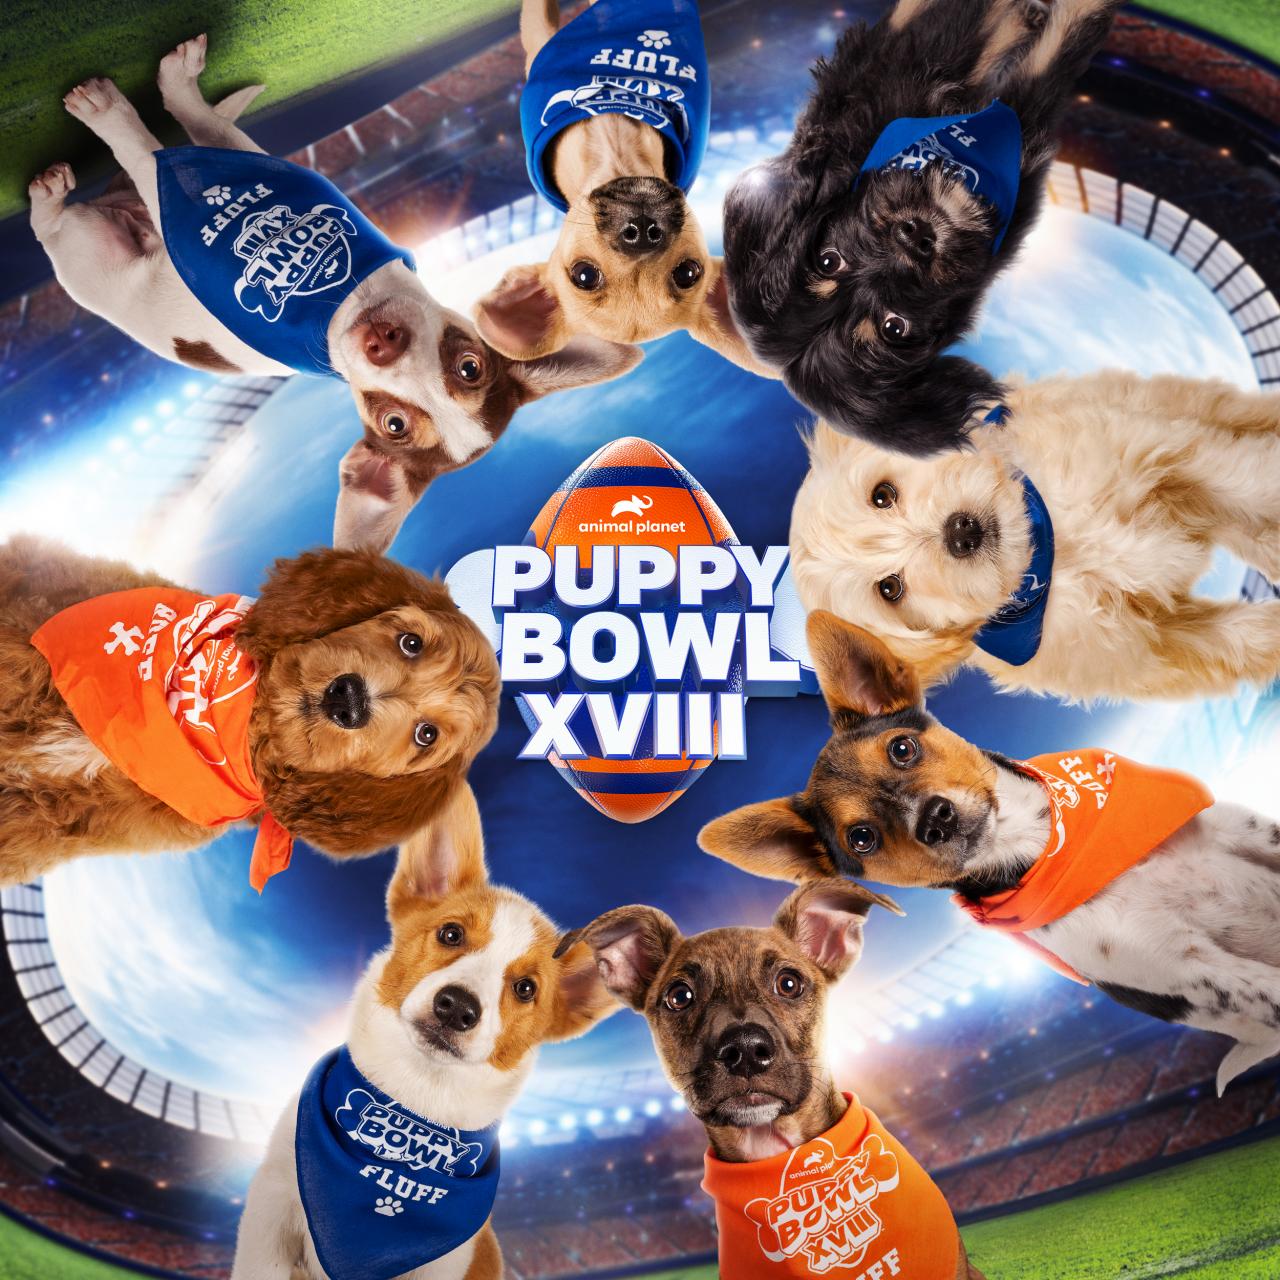 https://discovery.sndimg.com/content/dam/images/discovery/editorial/shows/p/puppybowl/2022/PuppyBowl2022_KA_FN.jpg.rend.hgtvcom.1280.1280.suffix/1641834657335.jpeg